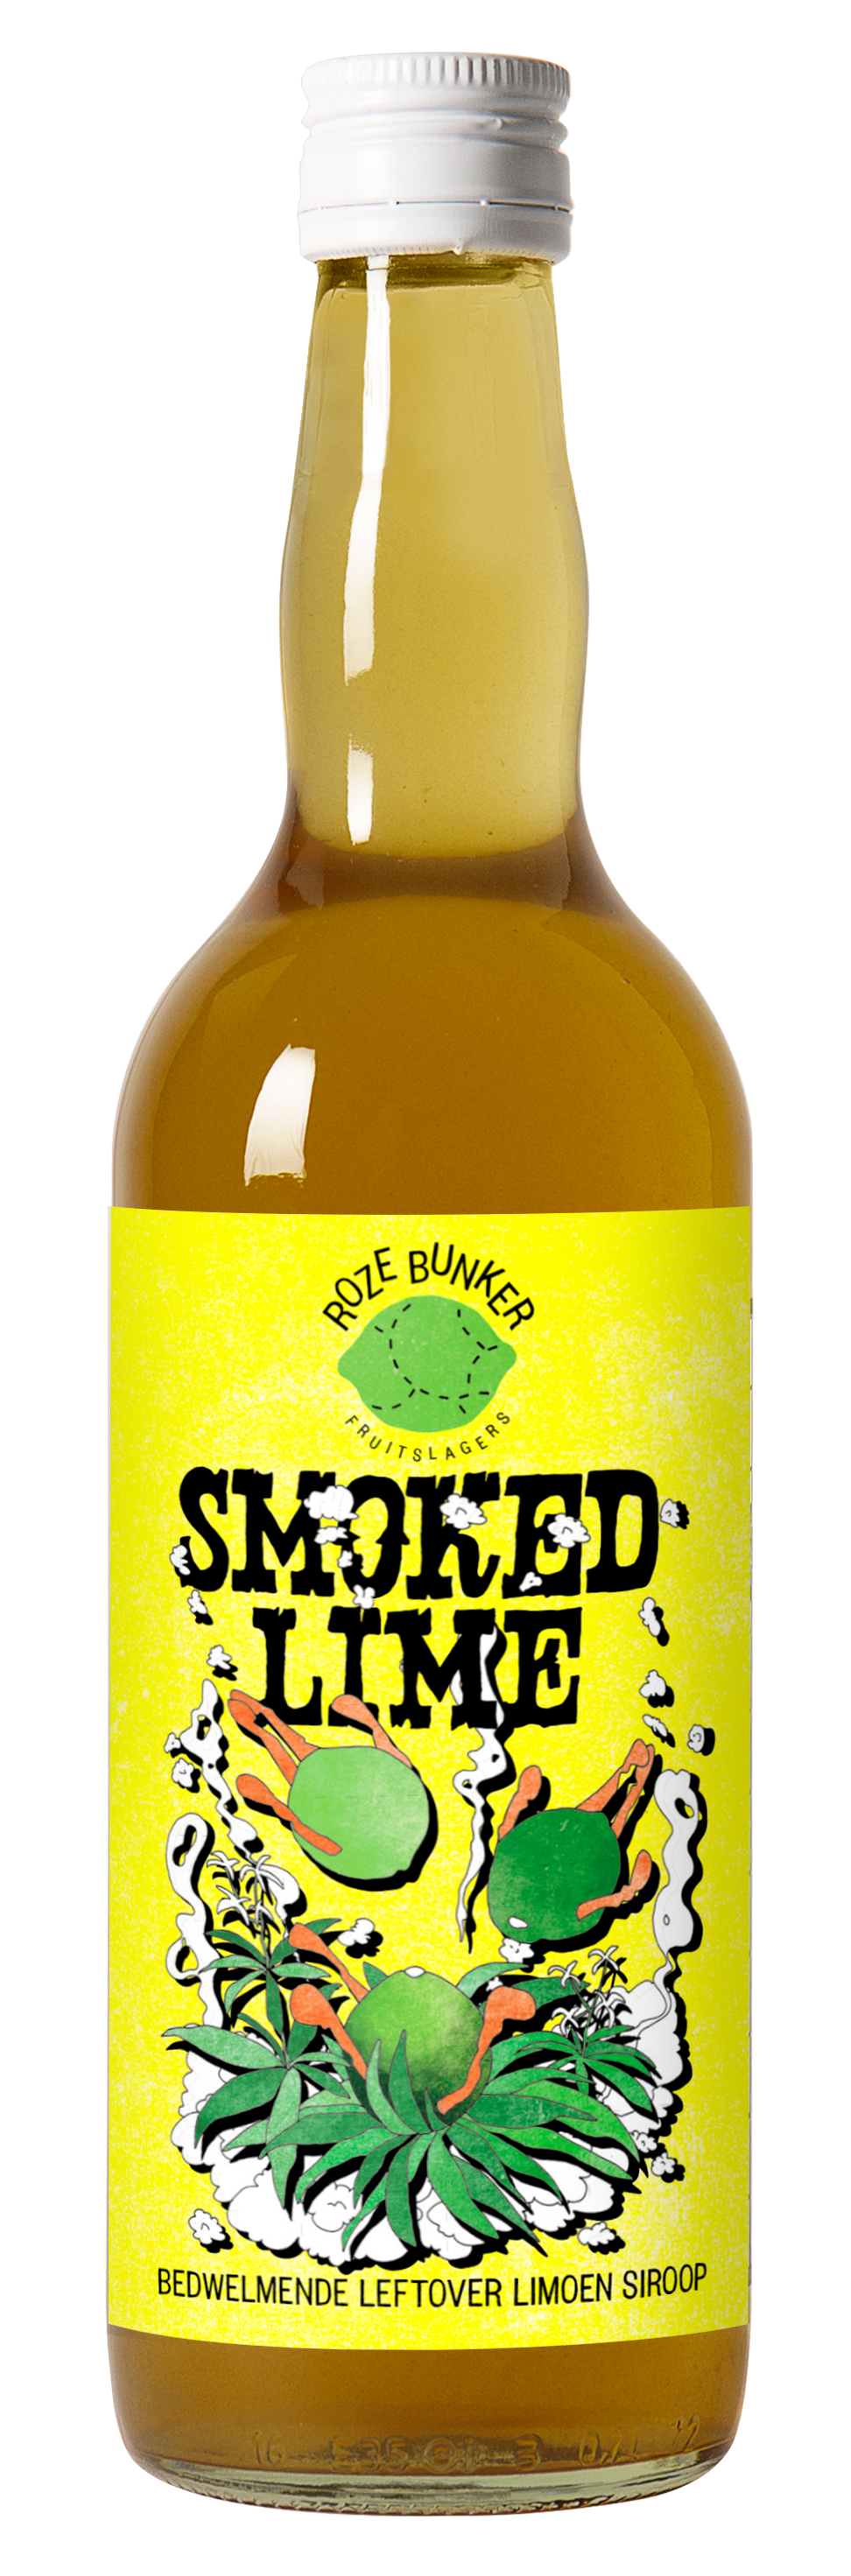 Bottle of Smoked lime syrup by Roze Bunker